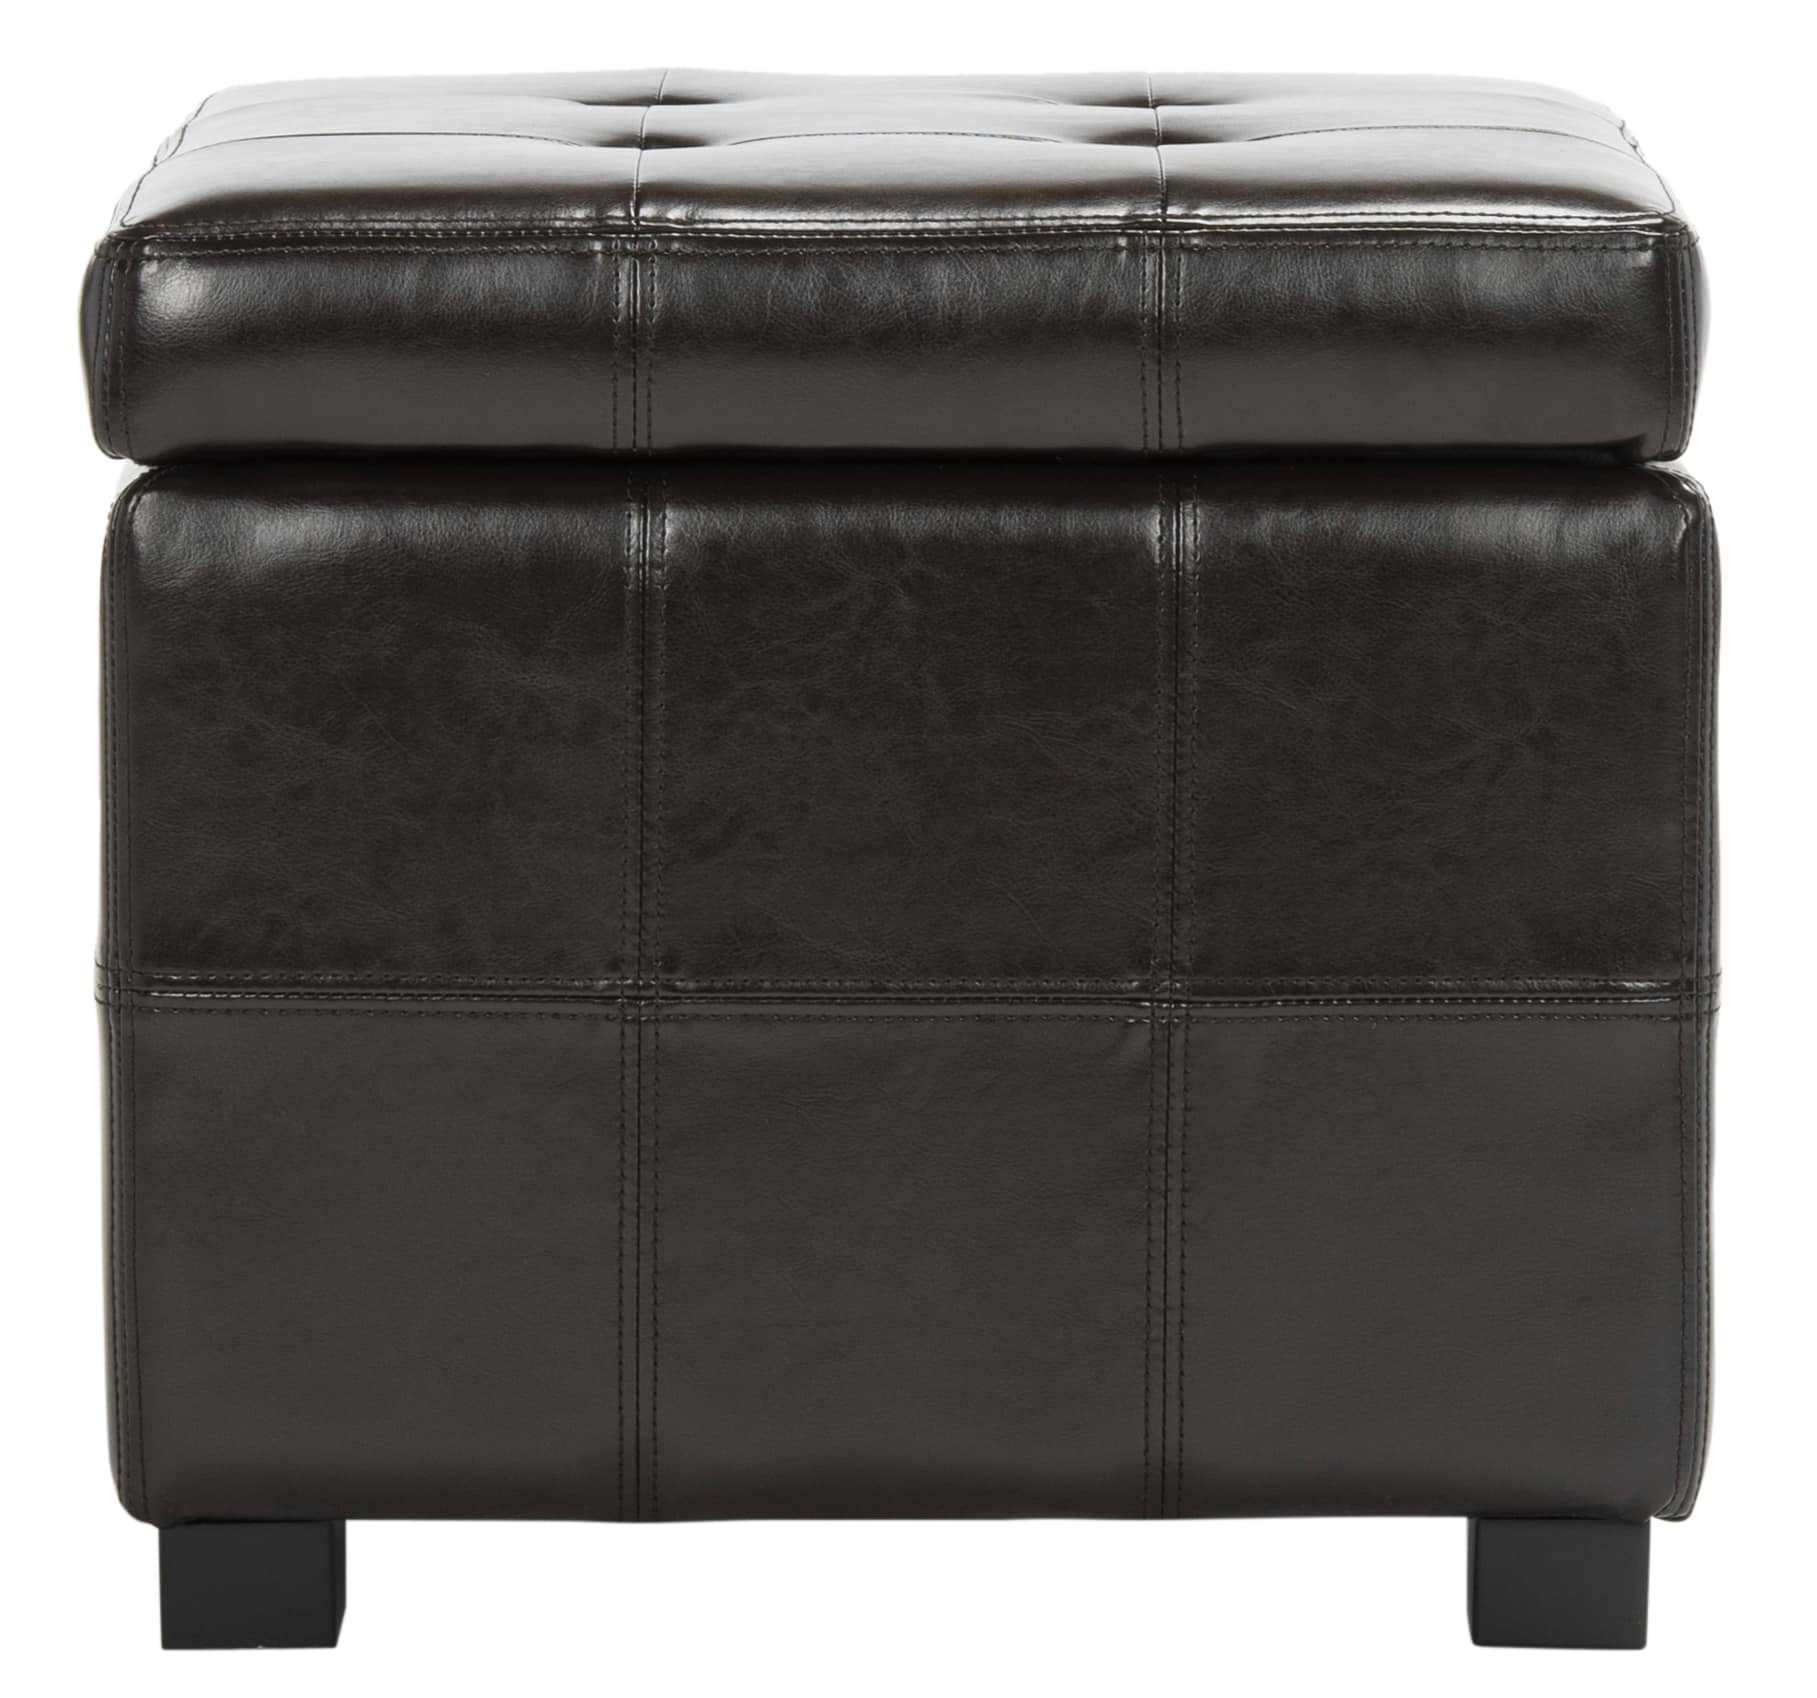 Maiden Square Tufted Ottoman in Brown